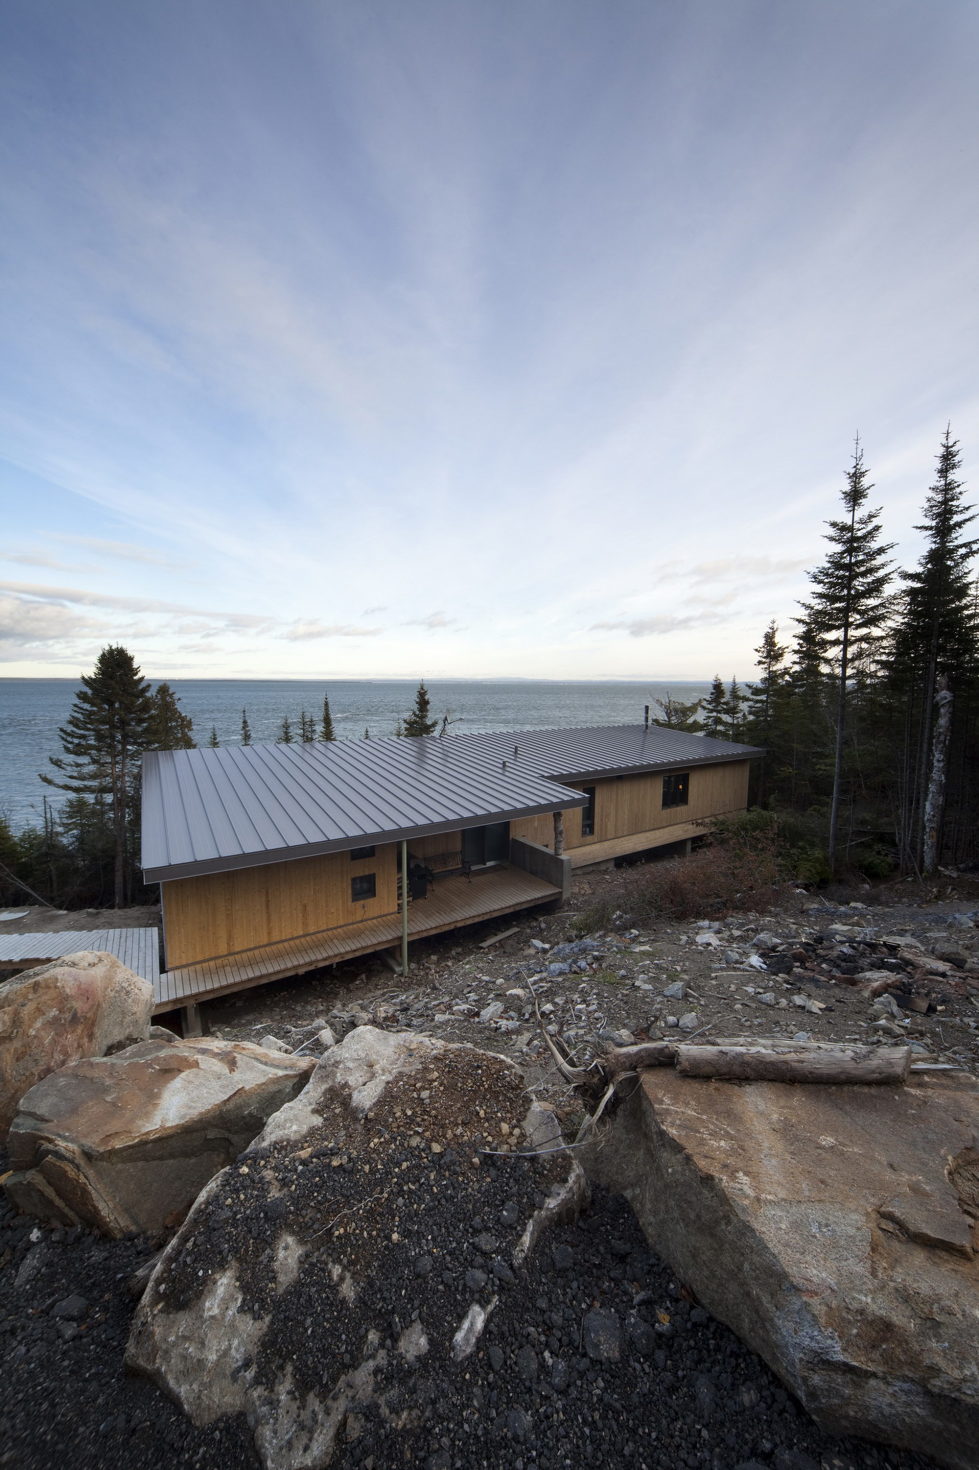 Panorama The Chalet On The Rocks In Saint-Simeon, Canada 1